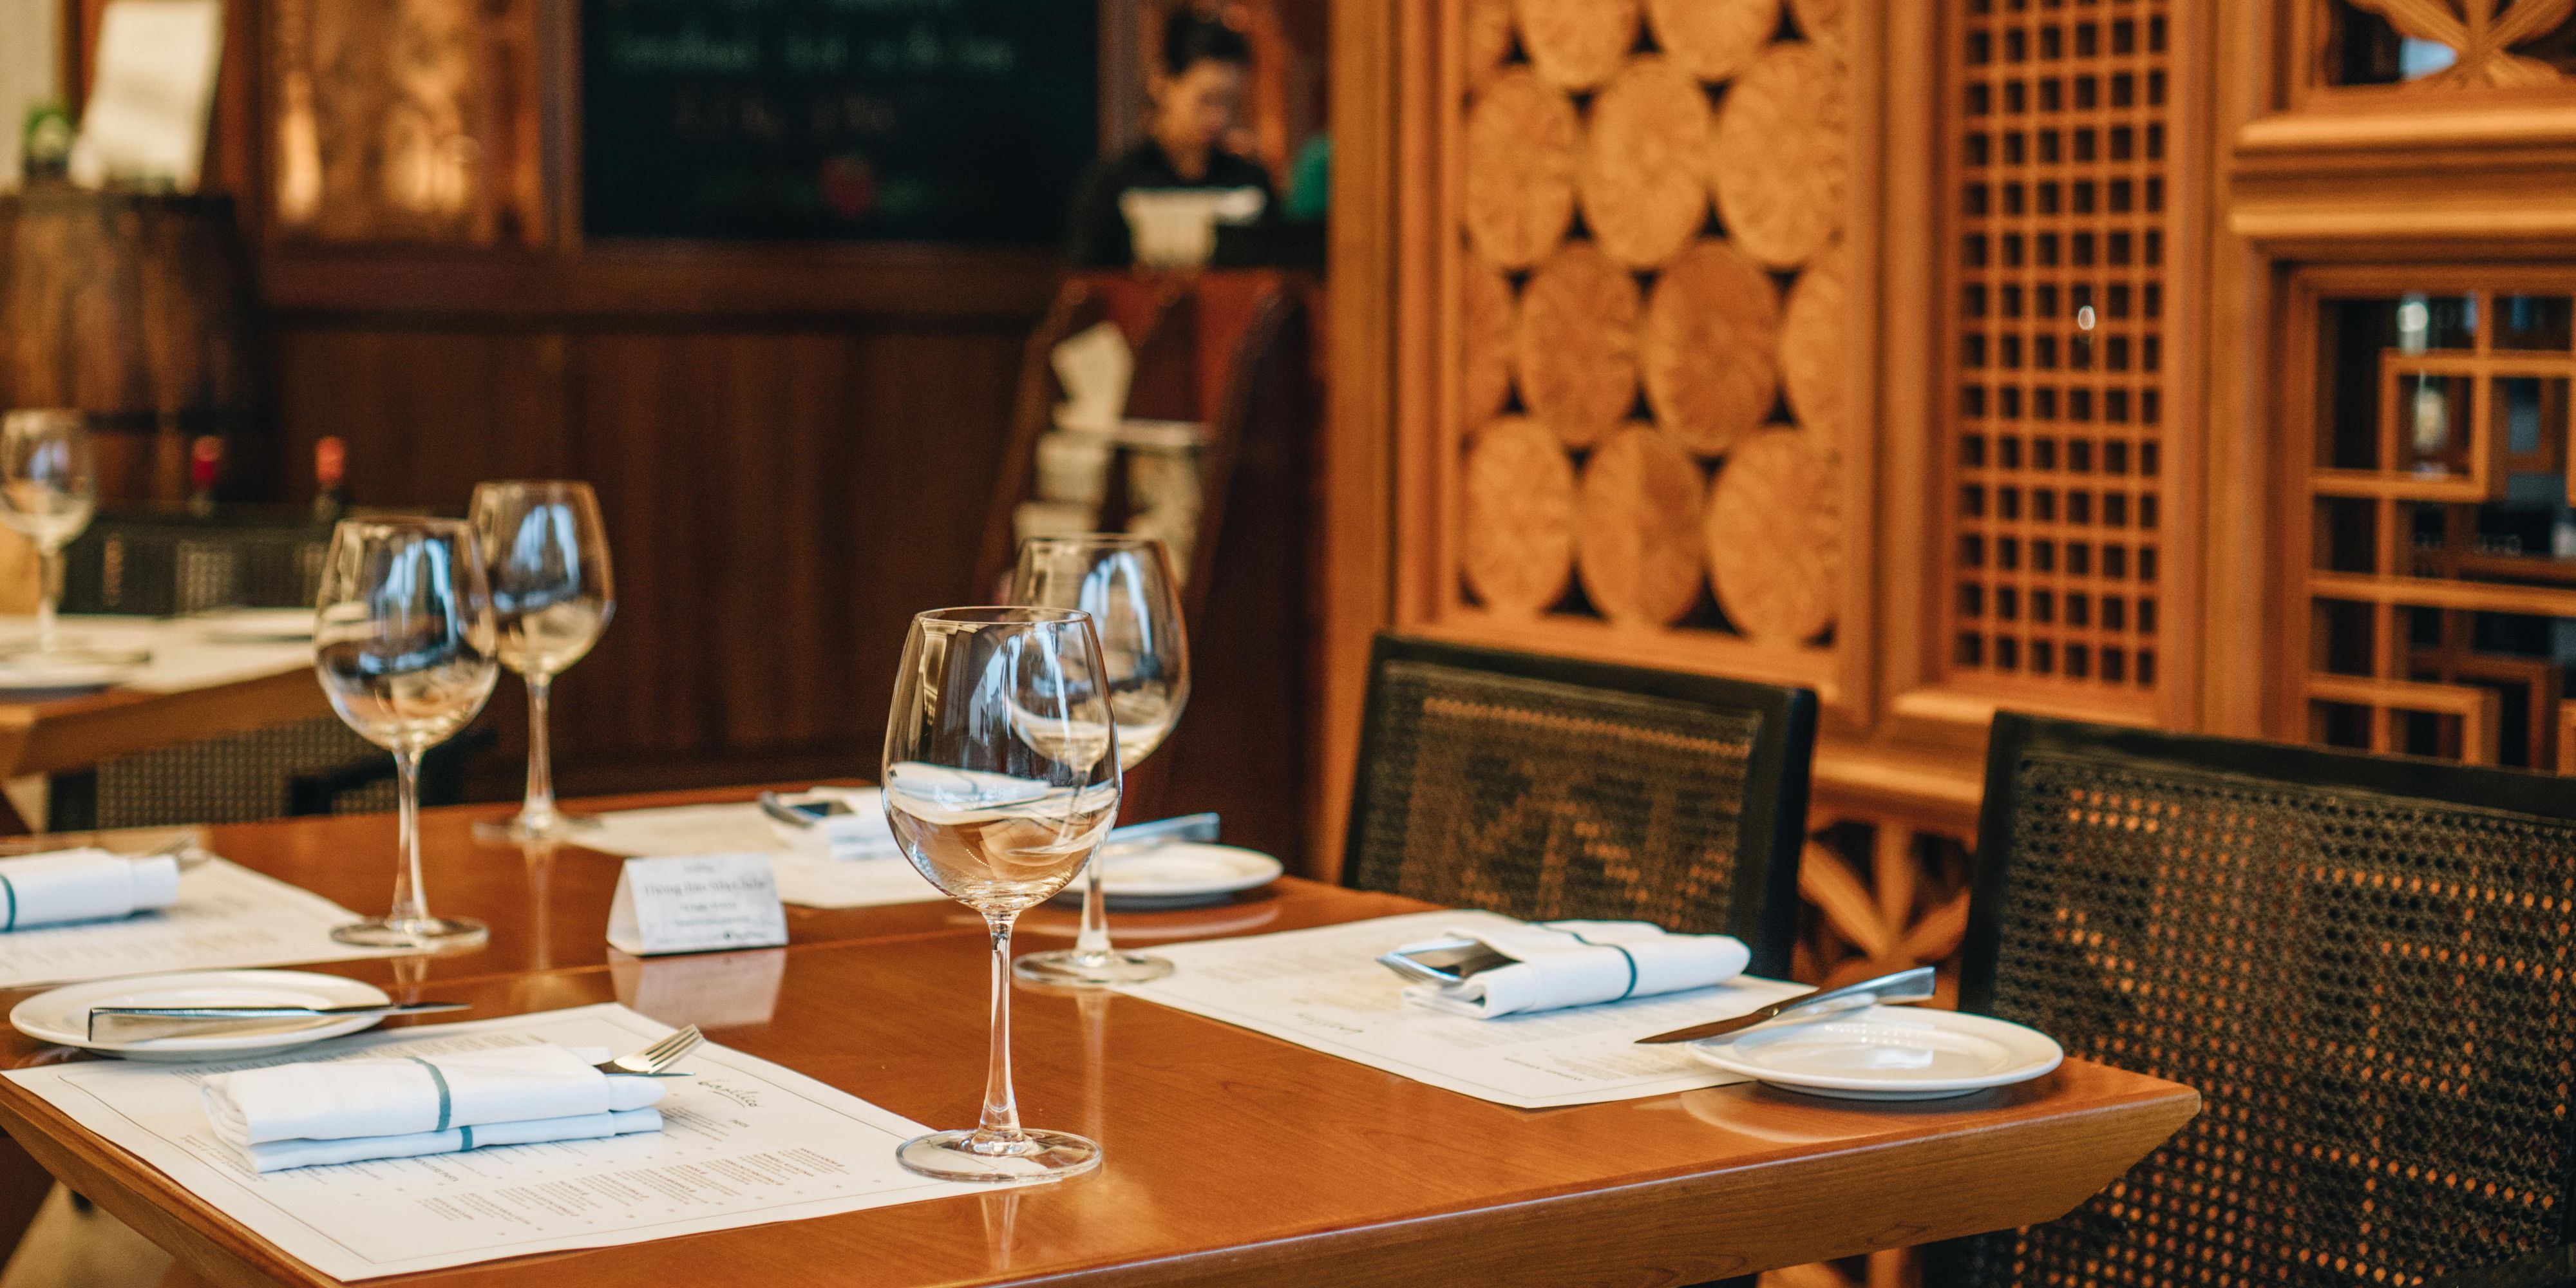 With its Italian informal ambiance, Basilico is the perfect place to meet colleagues, friends, and partners for an authentic Italian journey and taste dishes created from top-quality Italian ingredients paired with exceptional Italian wines.